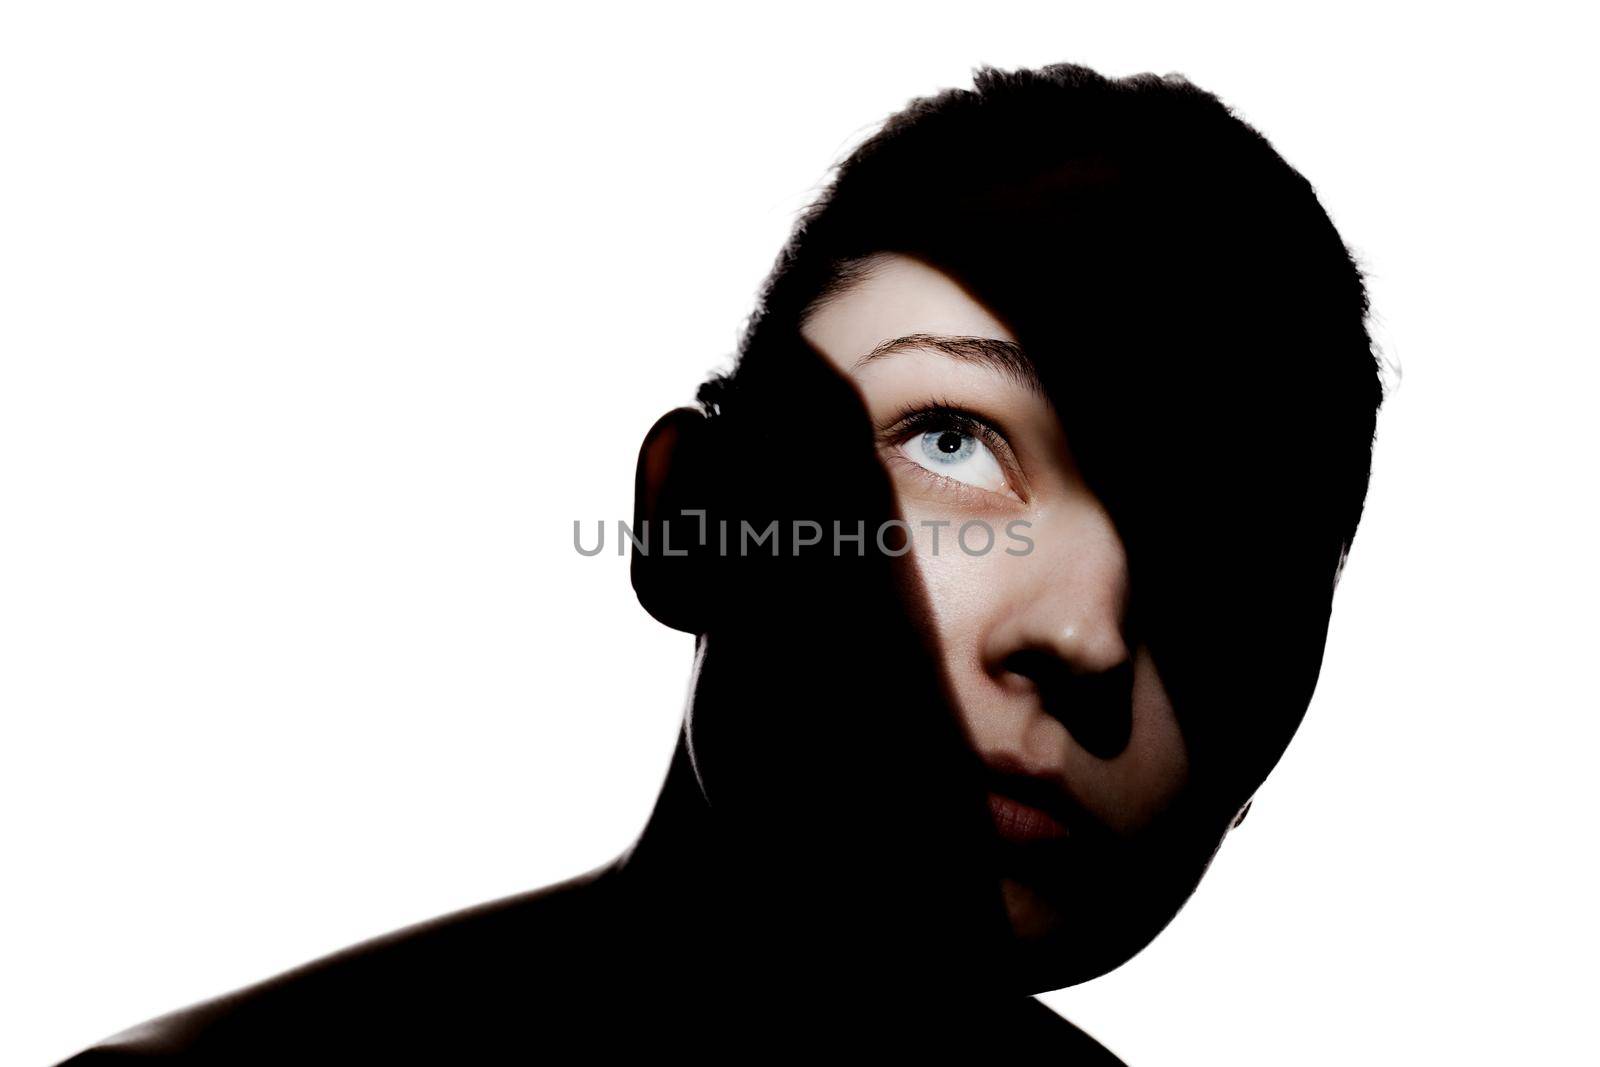 Fashionable studio portrait of a cute girl. Silhouette of a beautiful young woman with hard shadows on her face. against white backgroung.